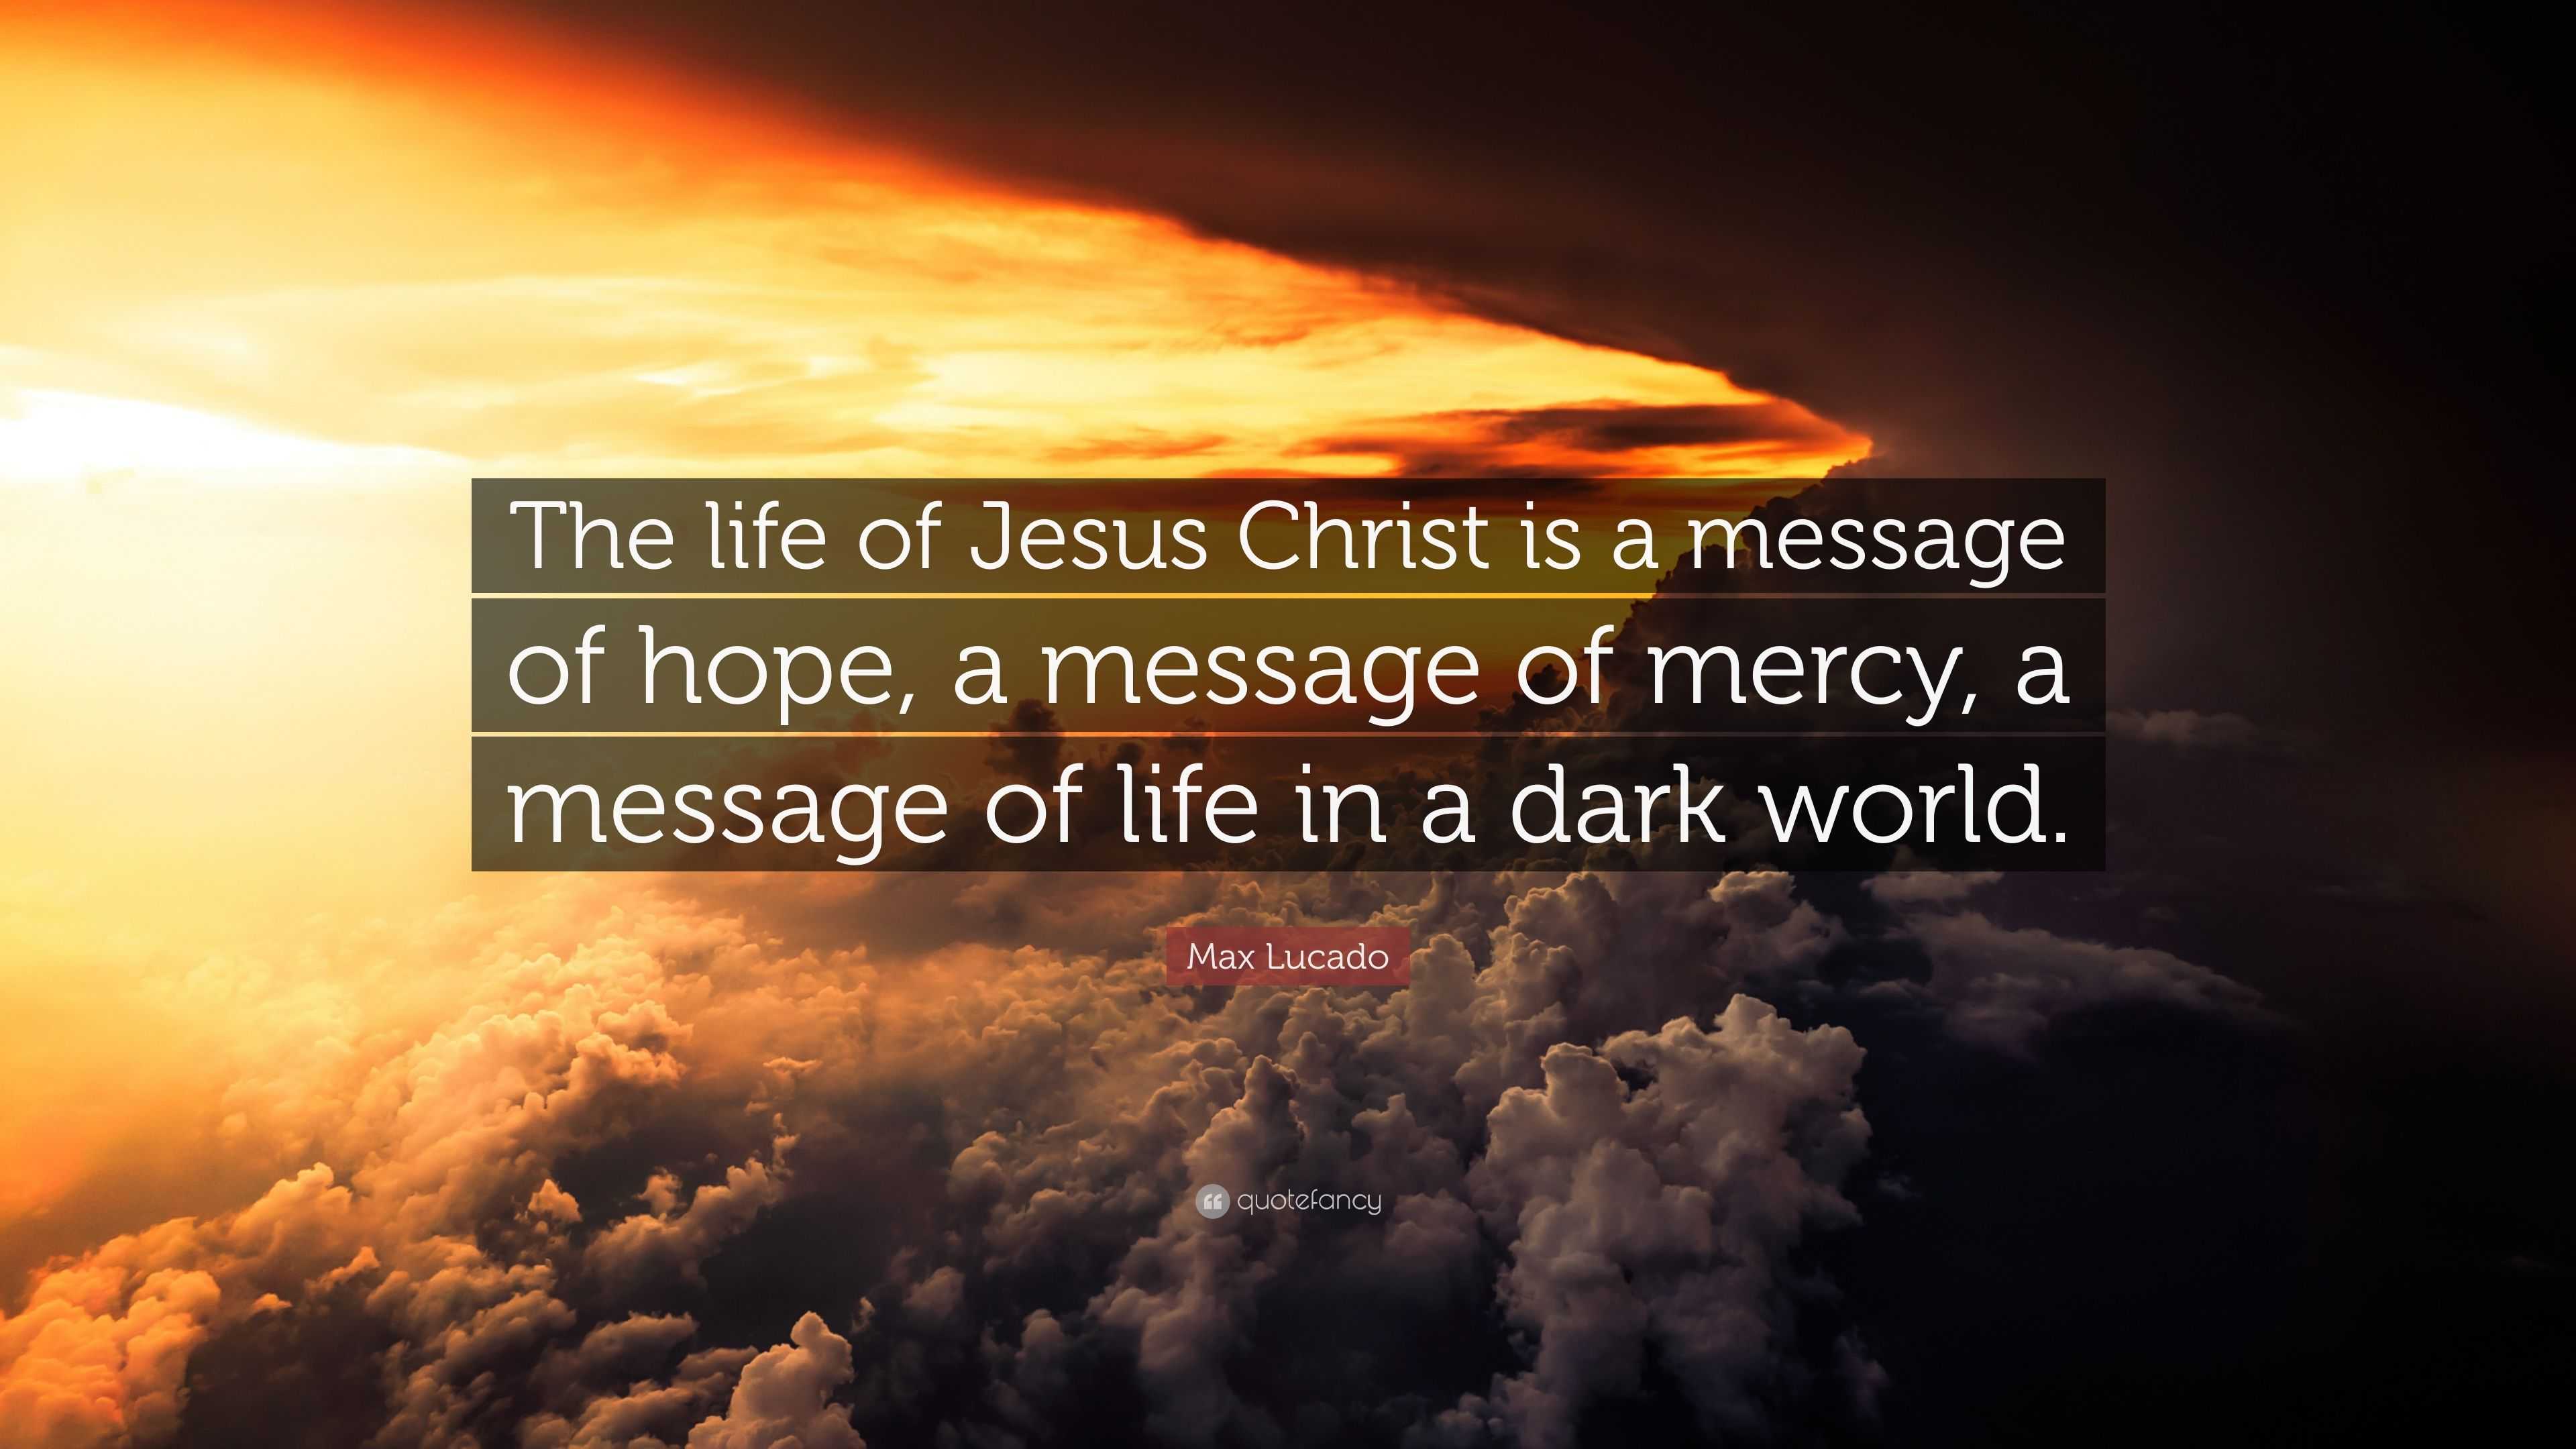 Max Lucado Quote: “The life of Jesus Christ is a message of hope, a